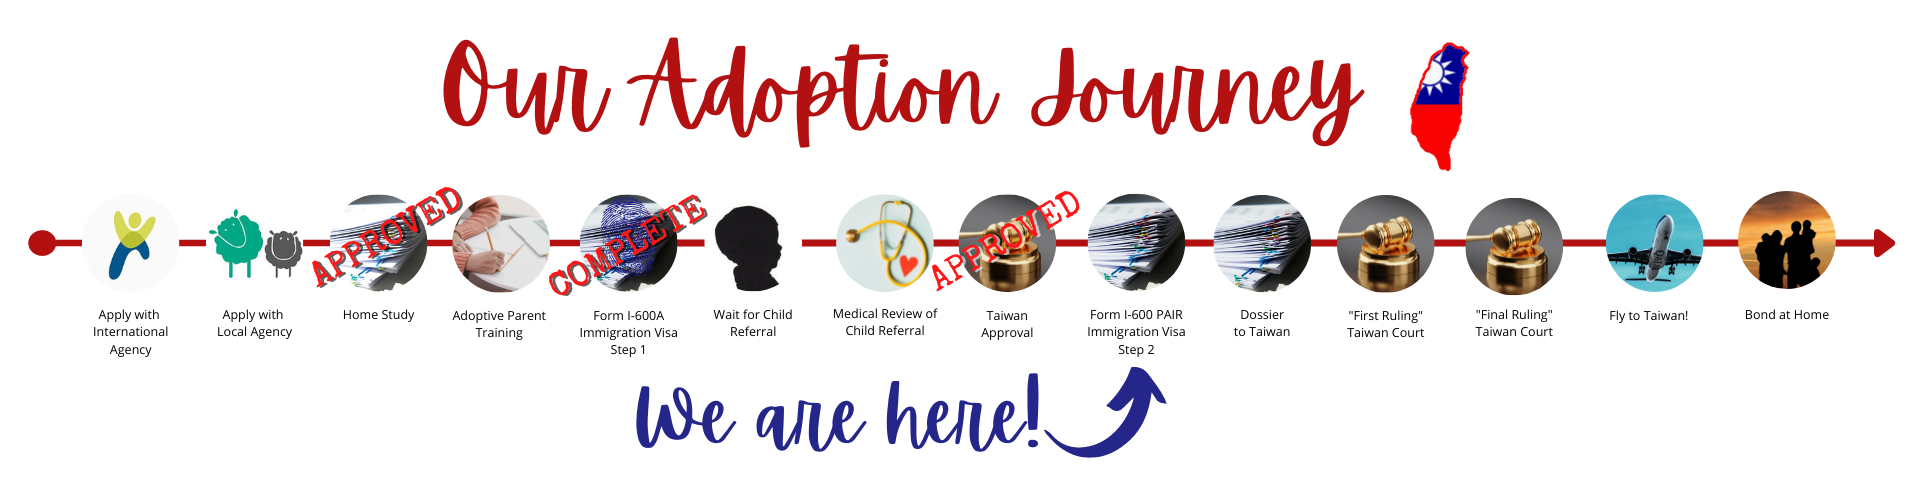 Our Adoption Journey: We are here! Current Step: Form i-600 Immigration Visa Step 2